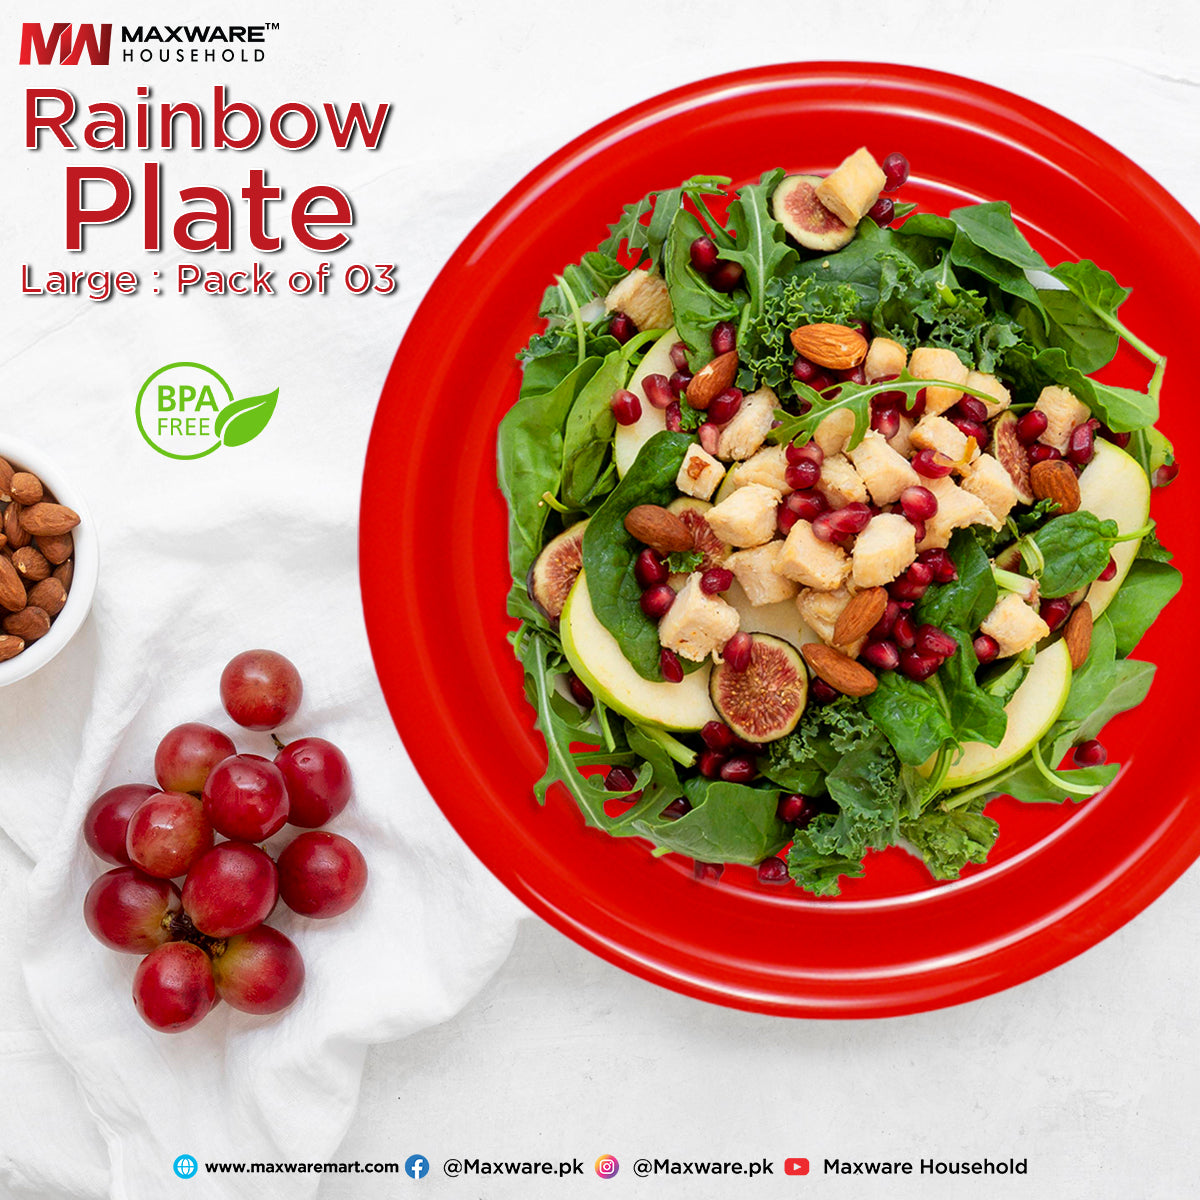 Rainbow Plate Large Pack of 3